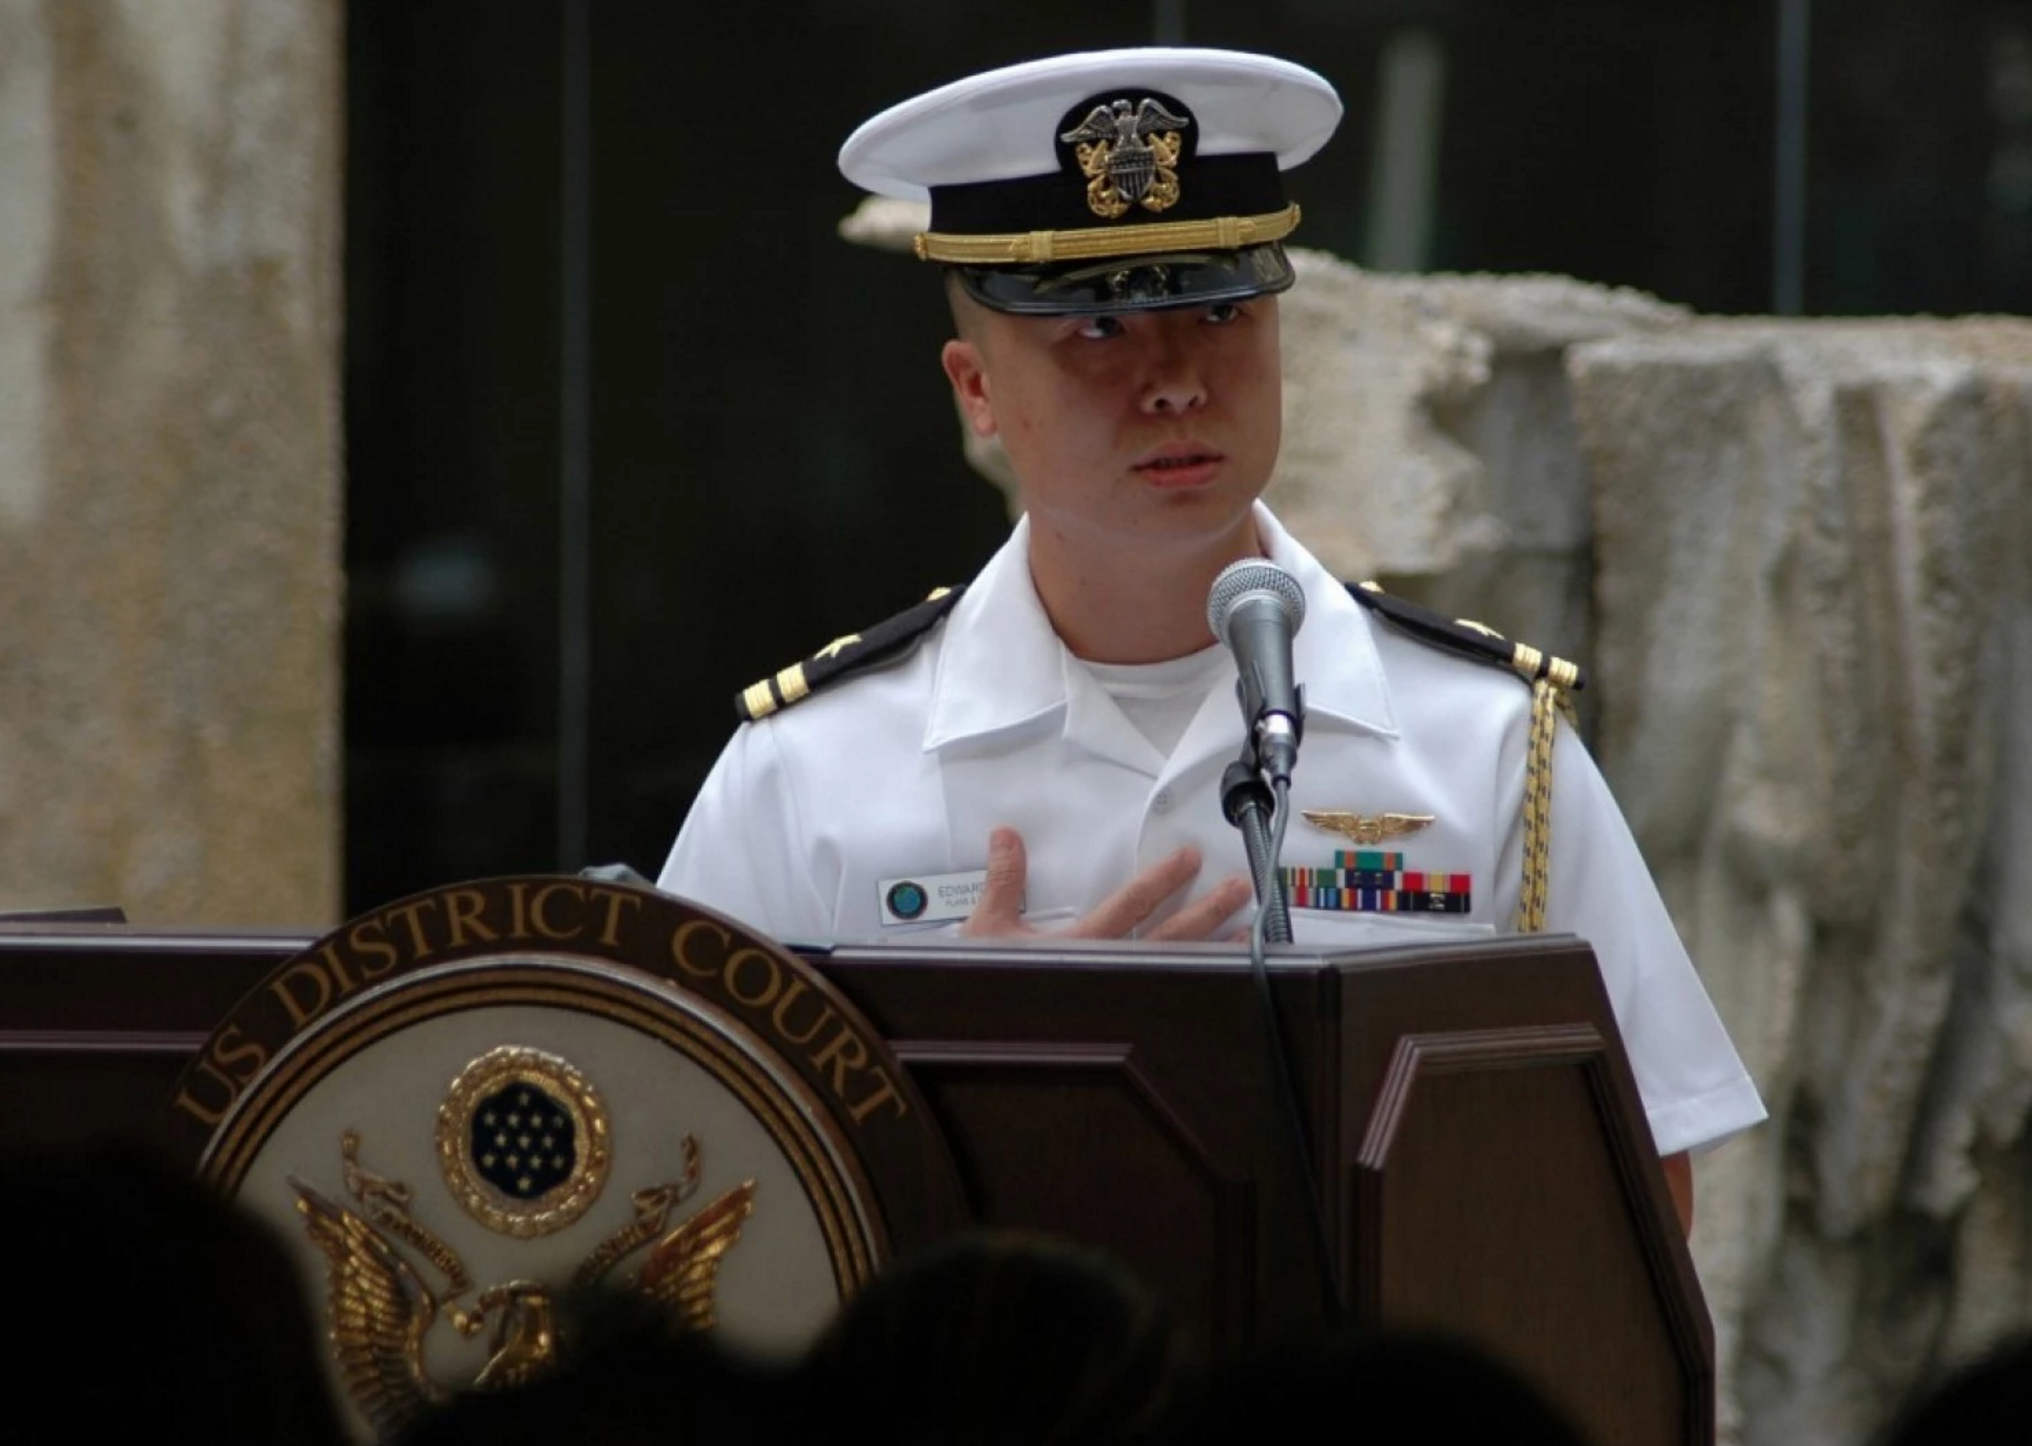 Then-Lt. Edward Lin speaking at 2008 U.S. naturalization ceremony in Hawaii. US Navy Photo